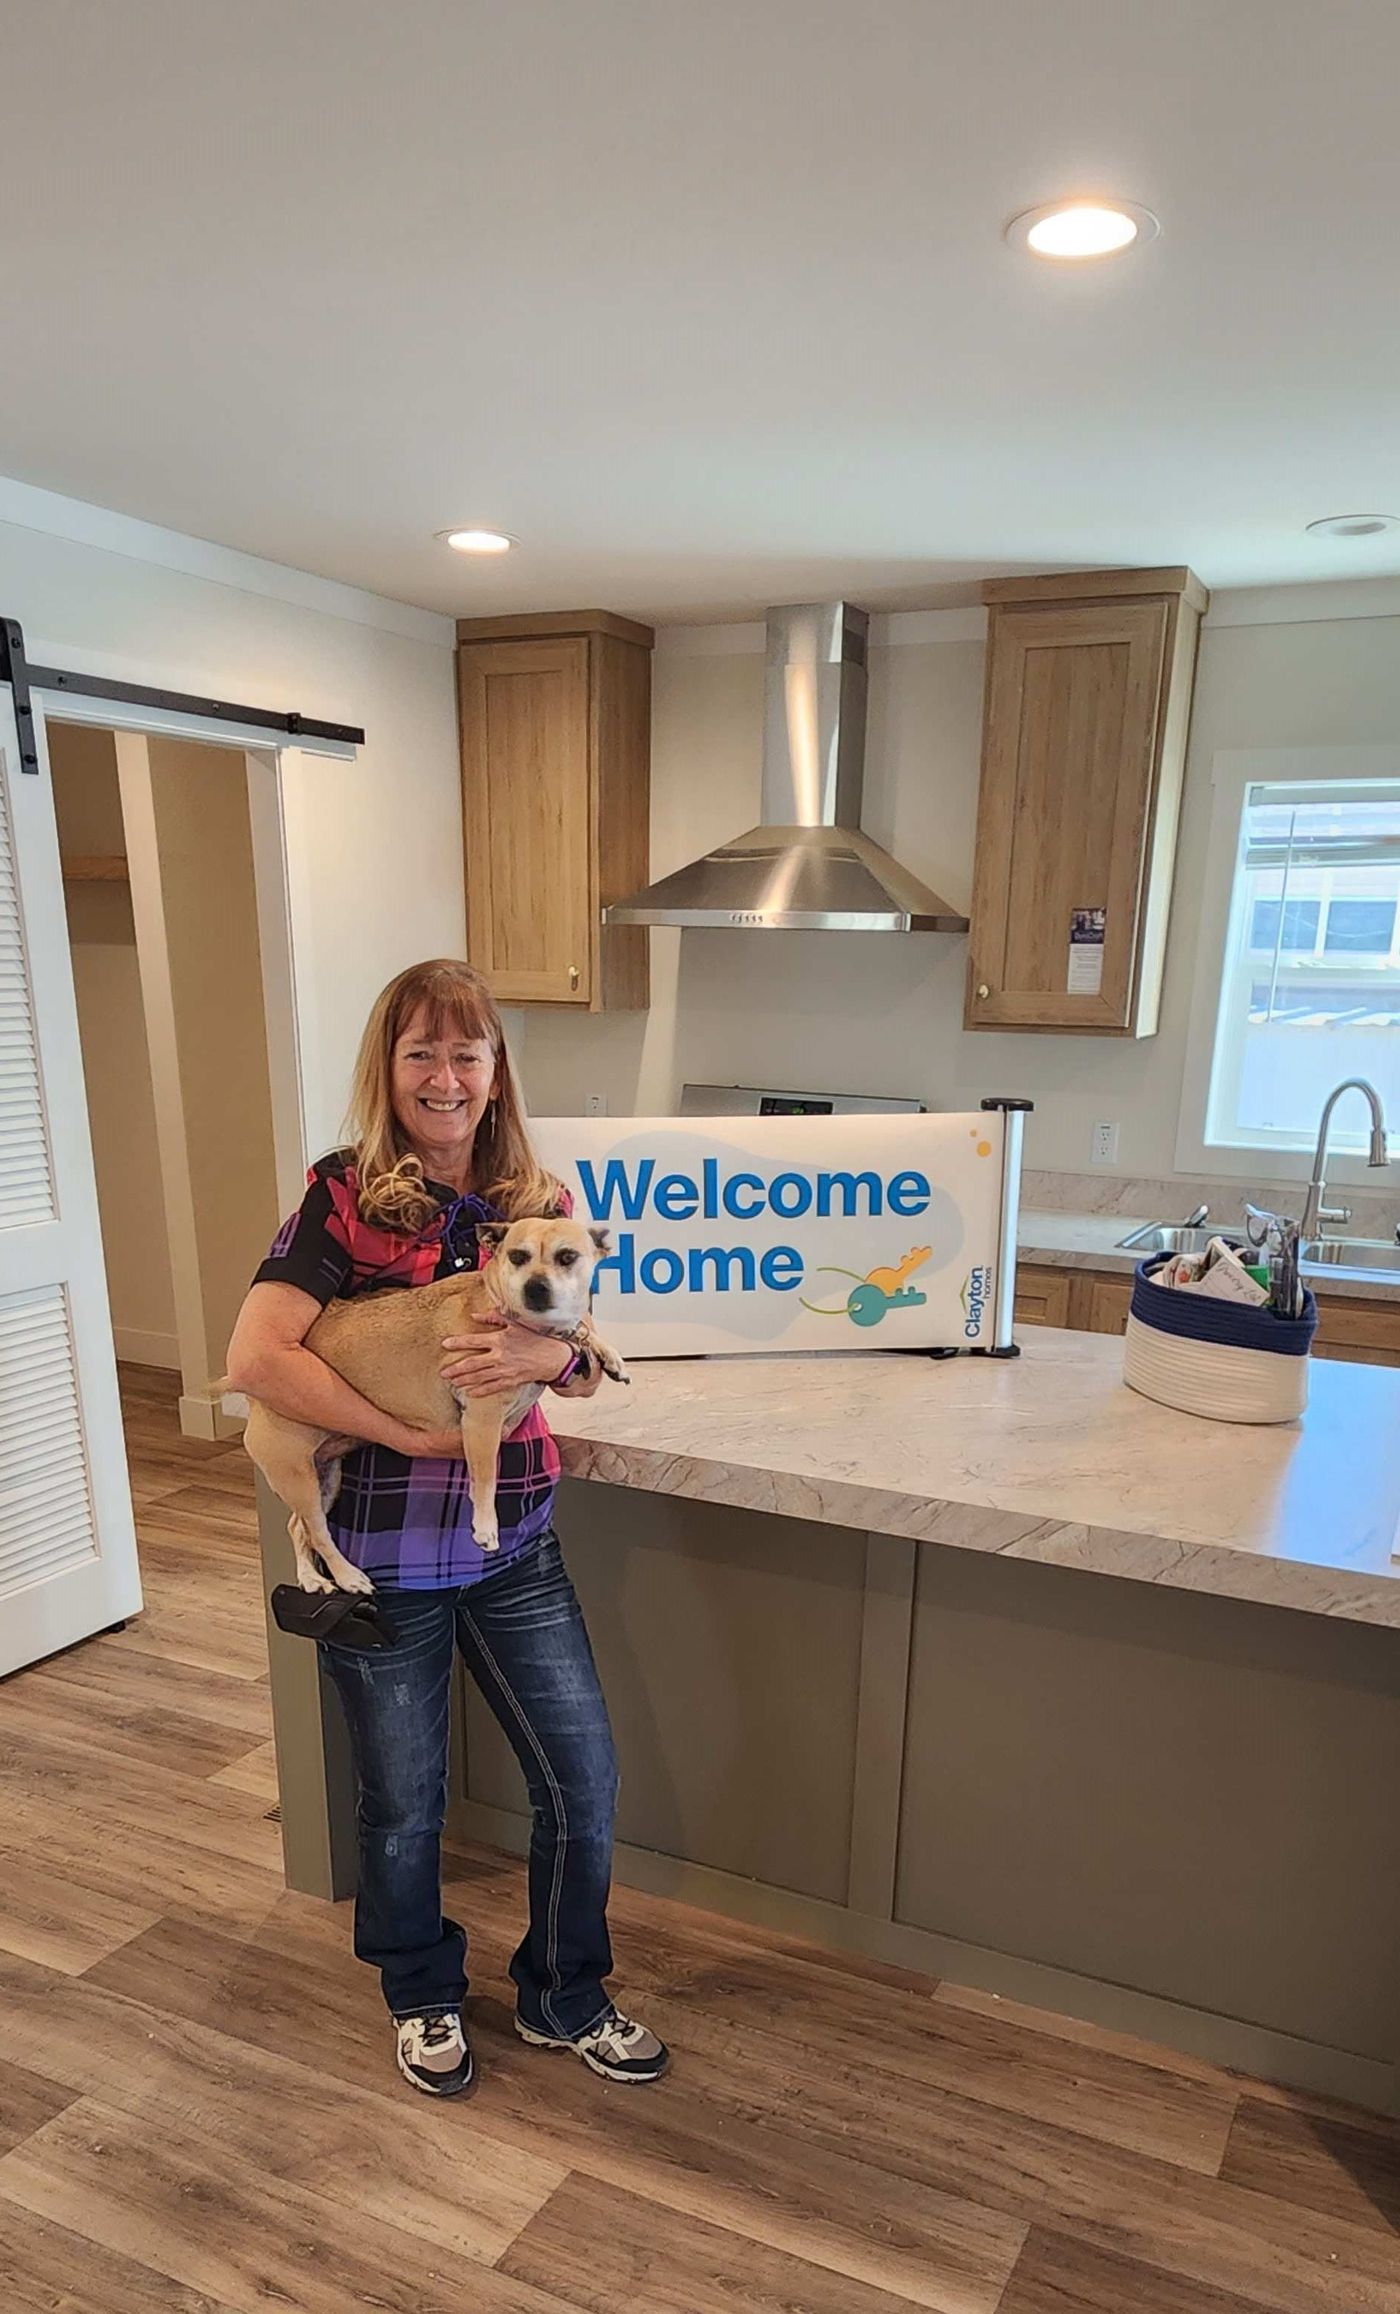 JANET M. welcome home image